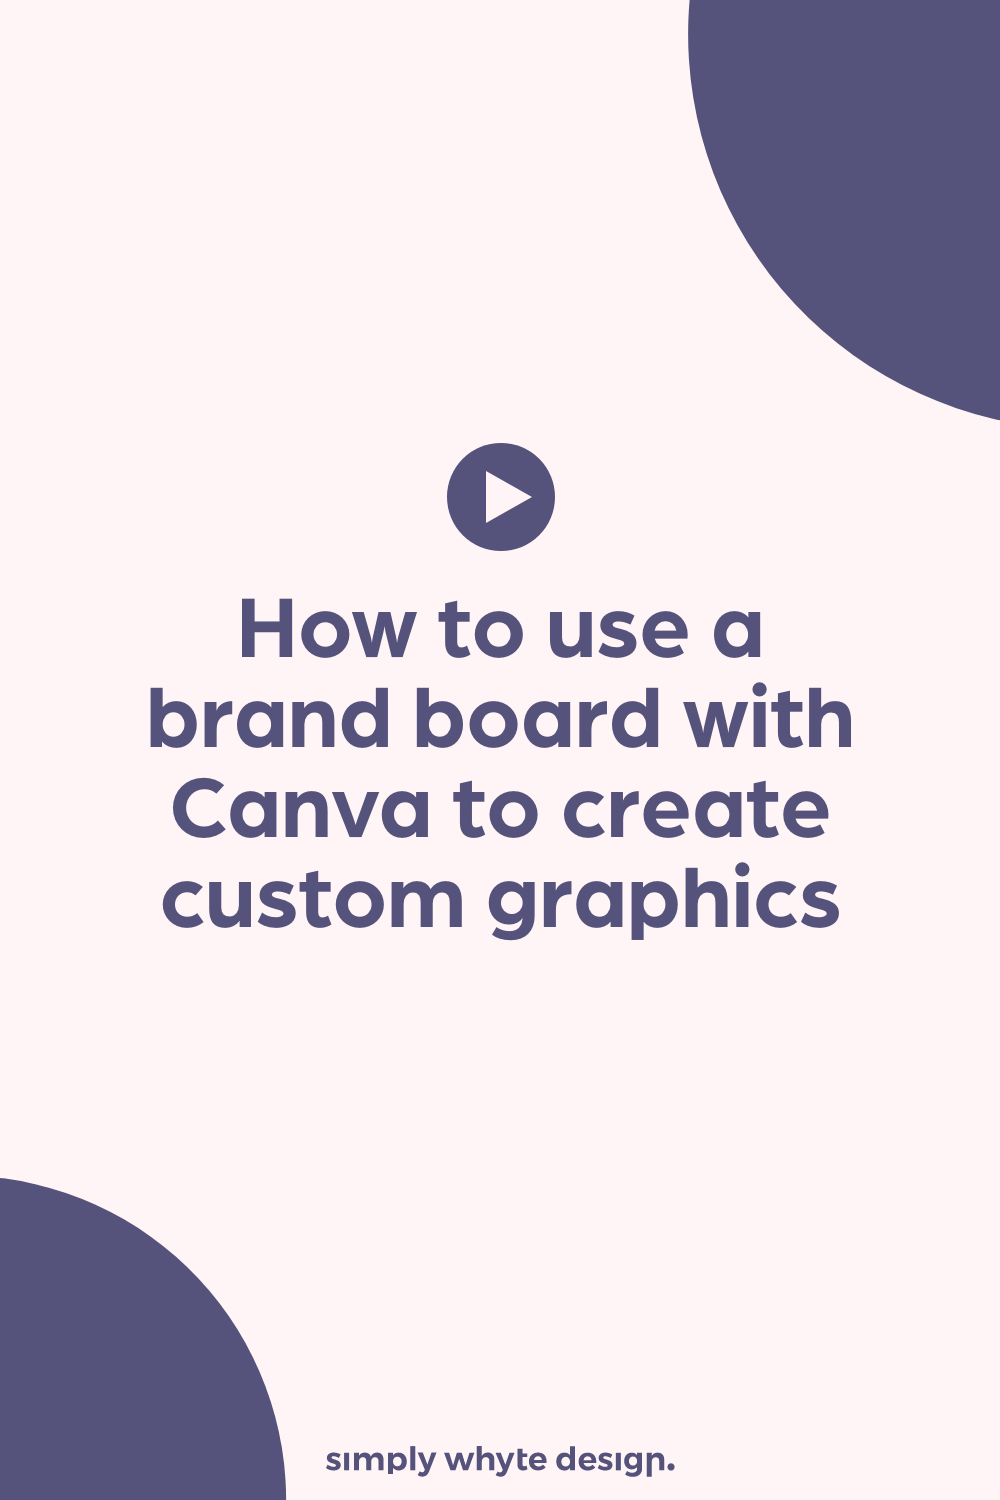 how to use a brand board to create custom graphics on canva